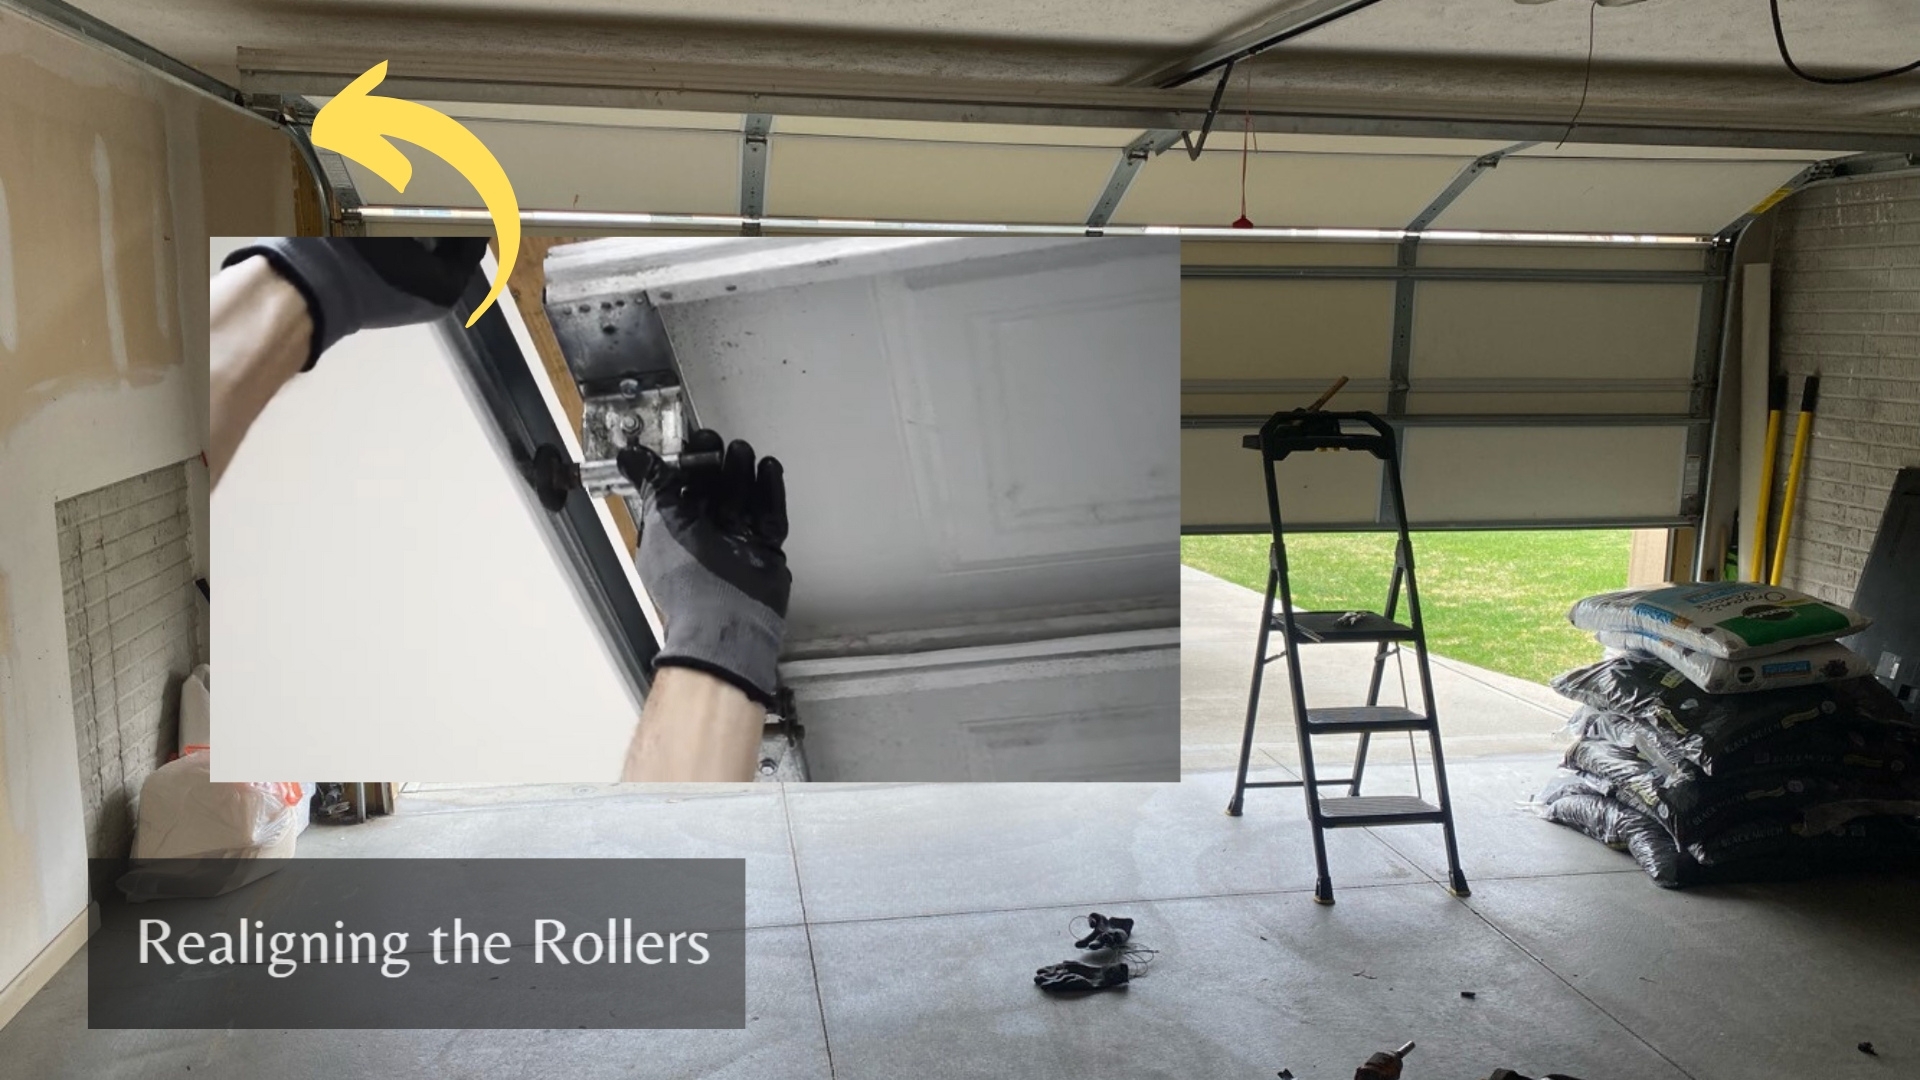 A man fixing the garage door by realigning the rollers